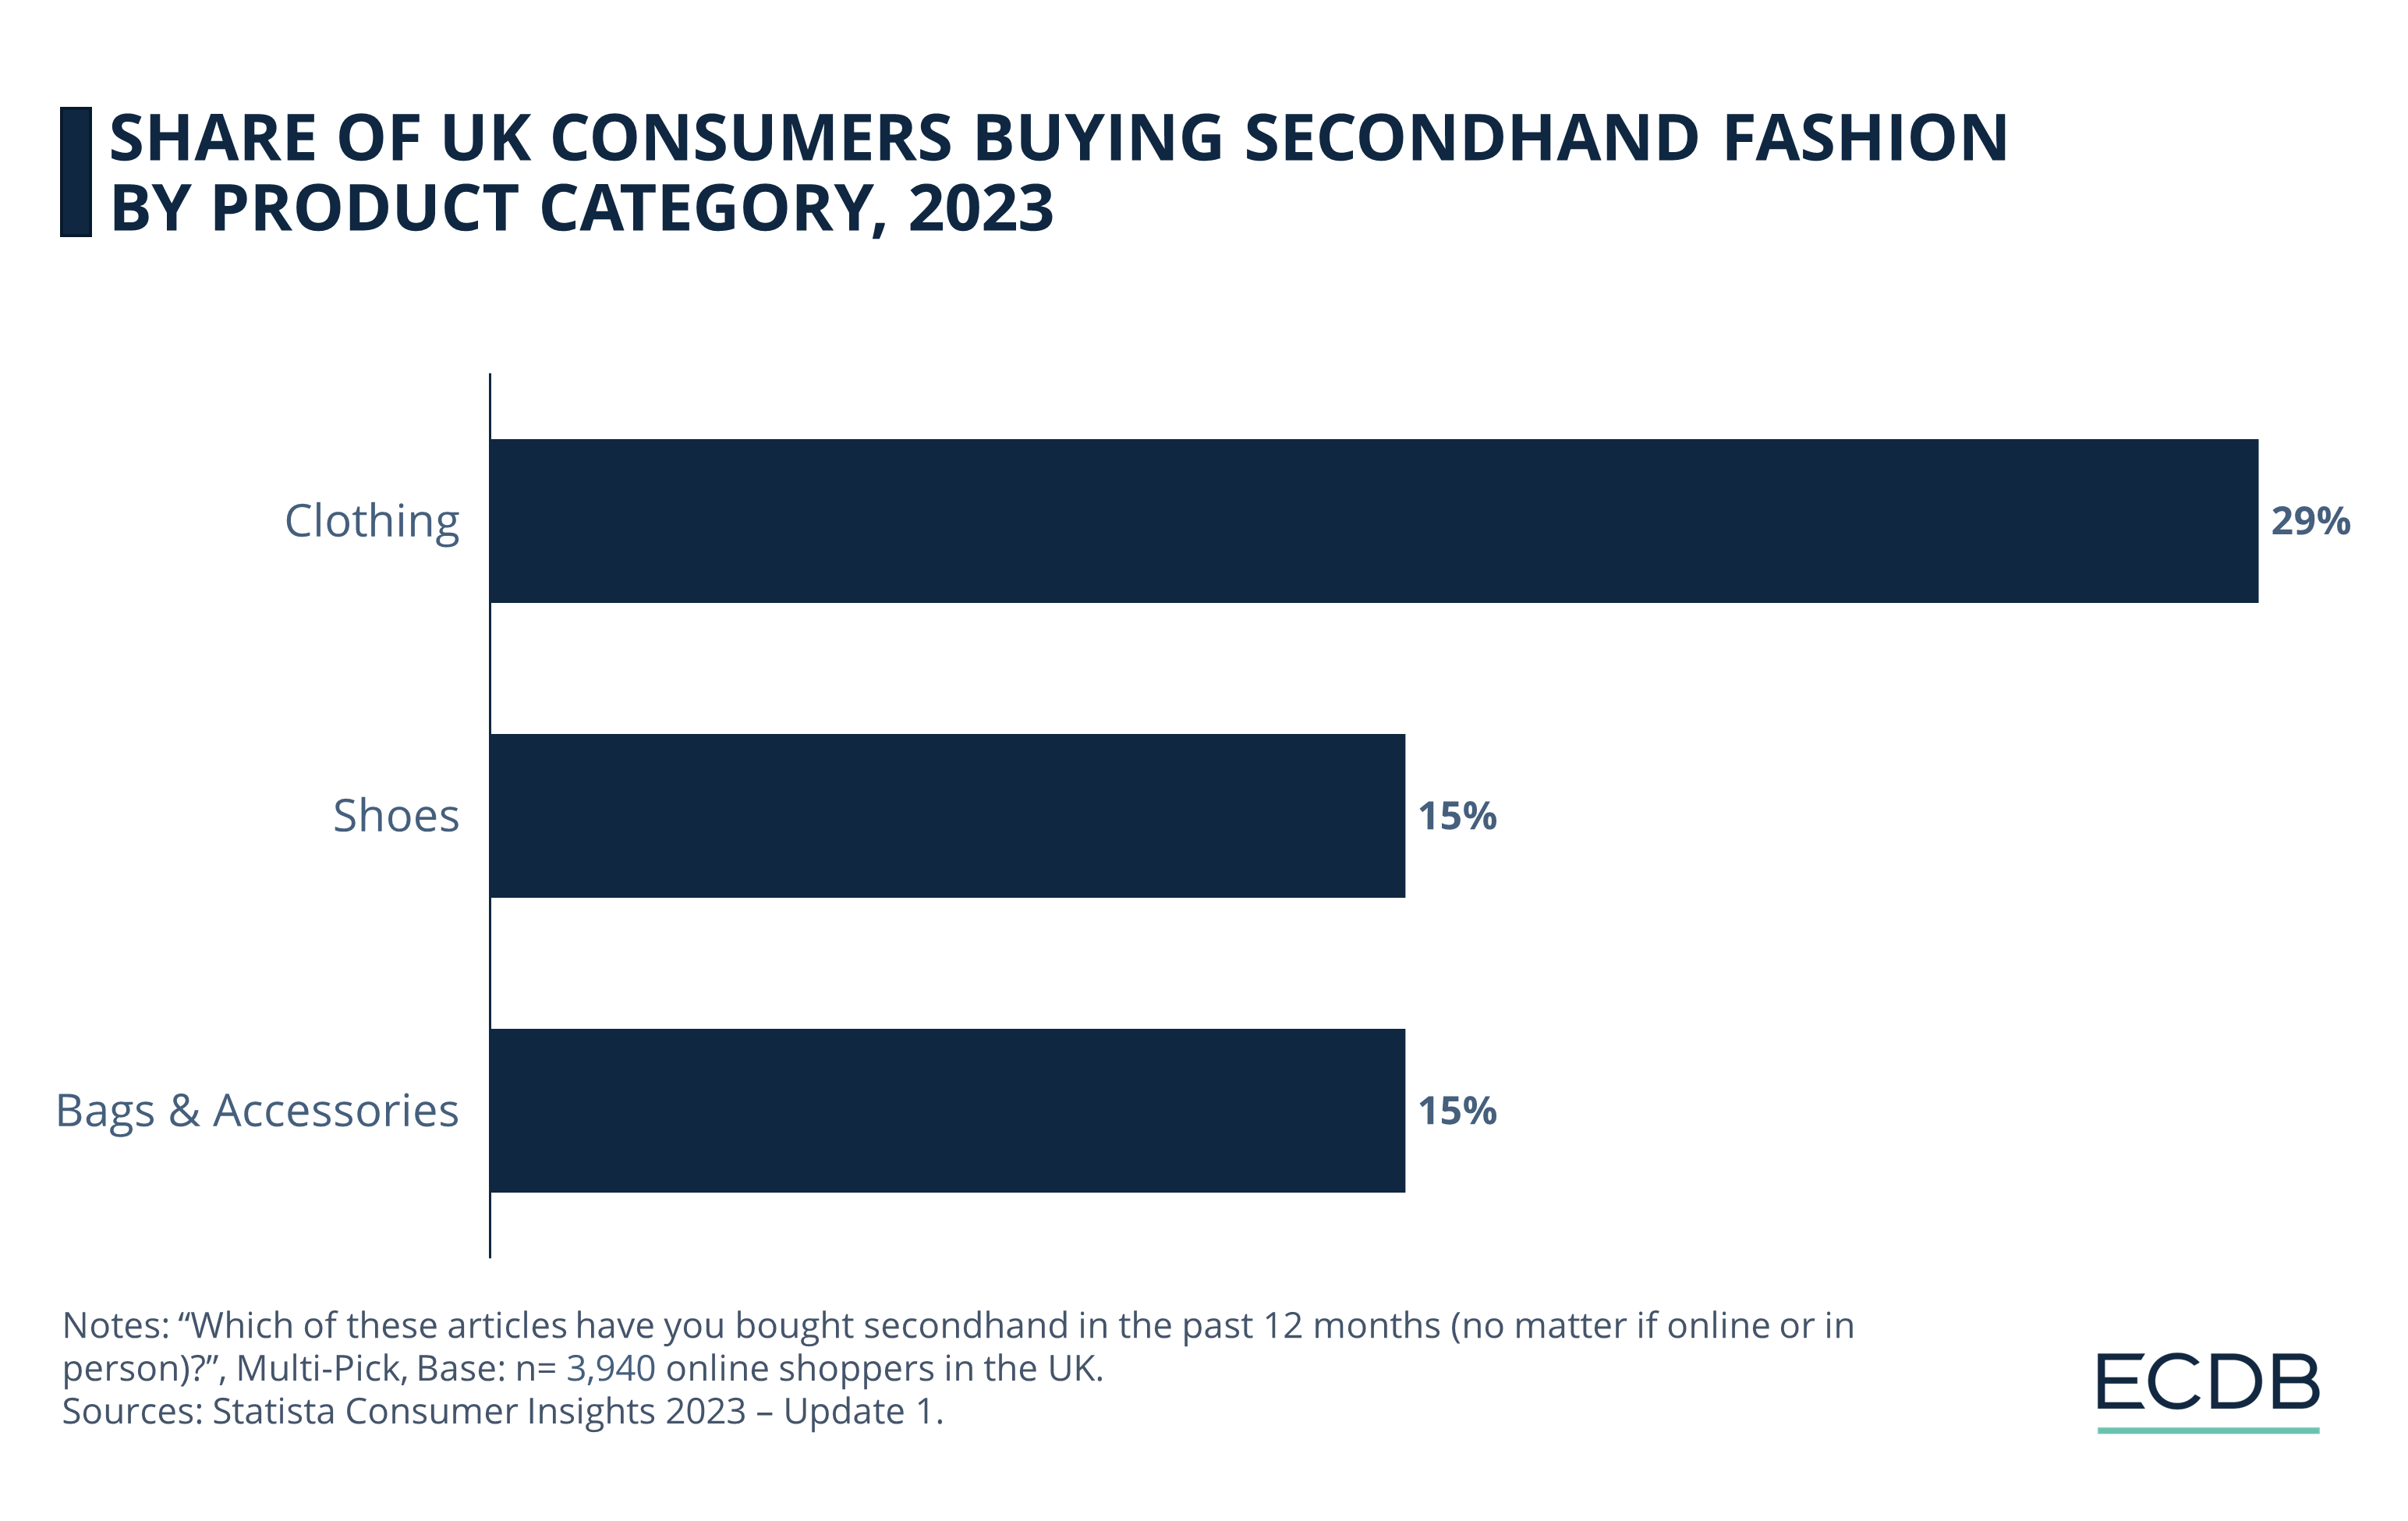 Share of UK Consumers Buying Secondhand Fashion by Product Category, 2023